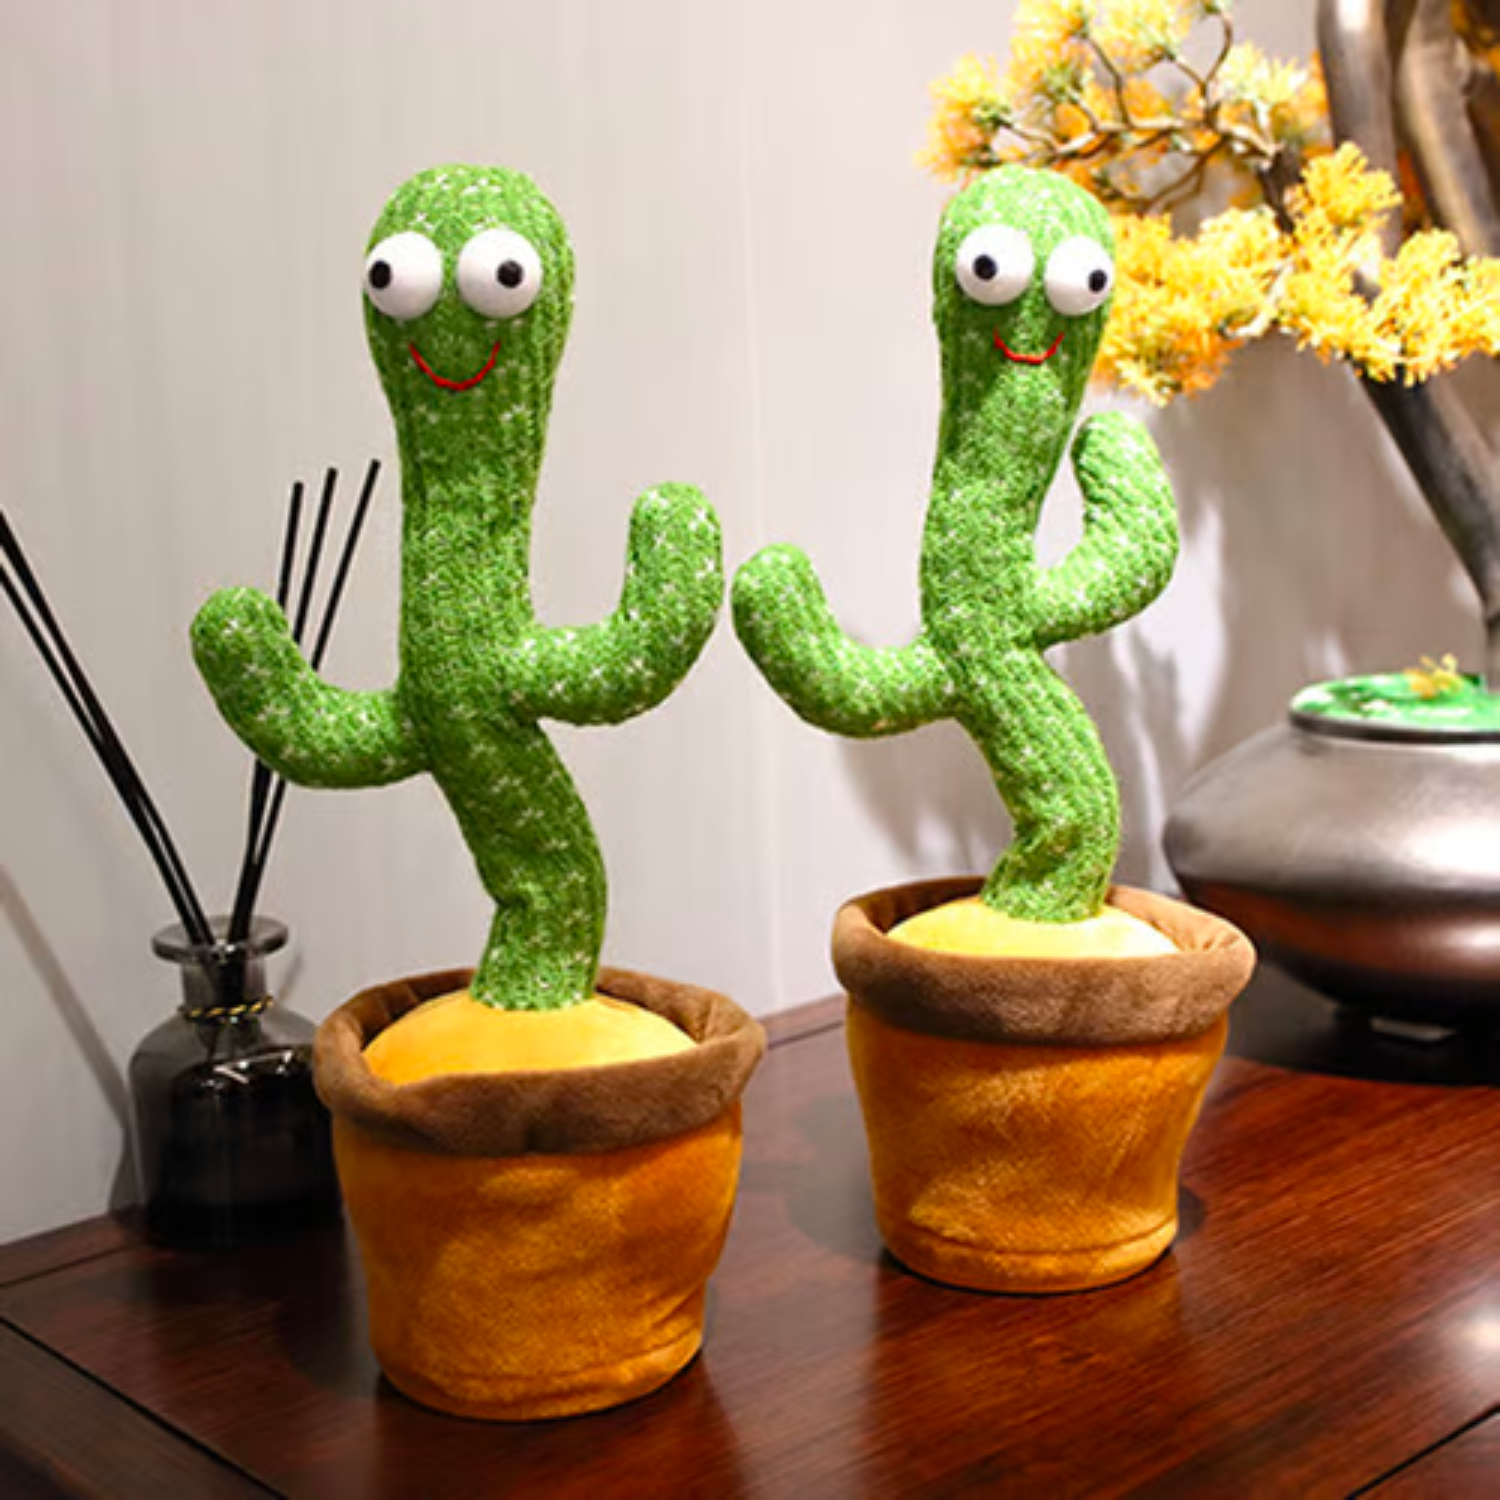 Dancing Cactus Toy Singing Talking Cactus Toy Record & Repeating